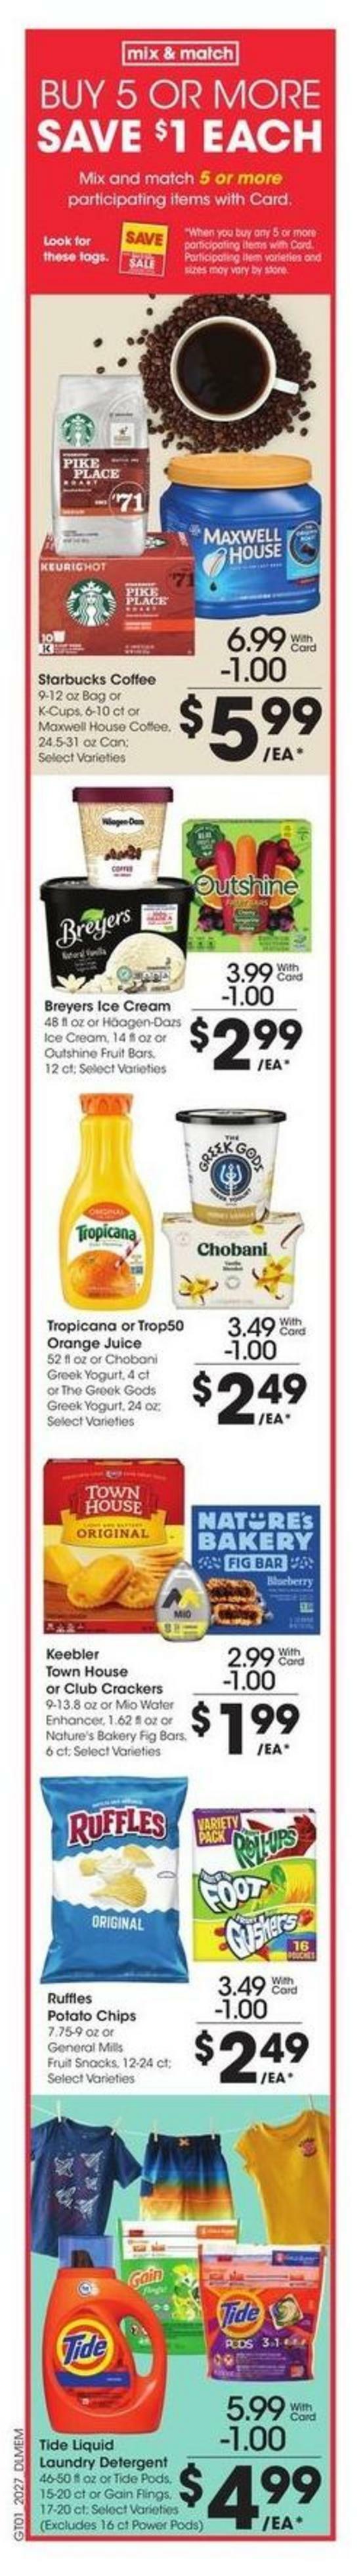 Kroger Weekly Ad from August 5